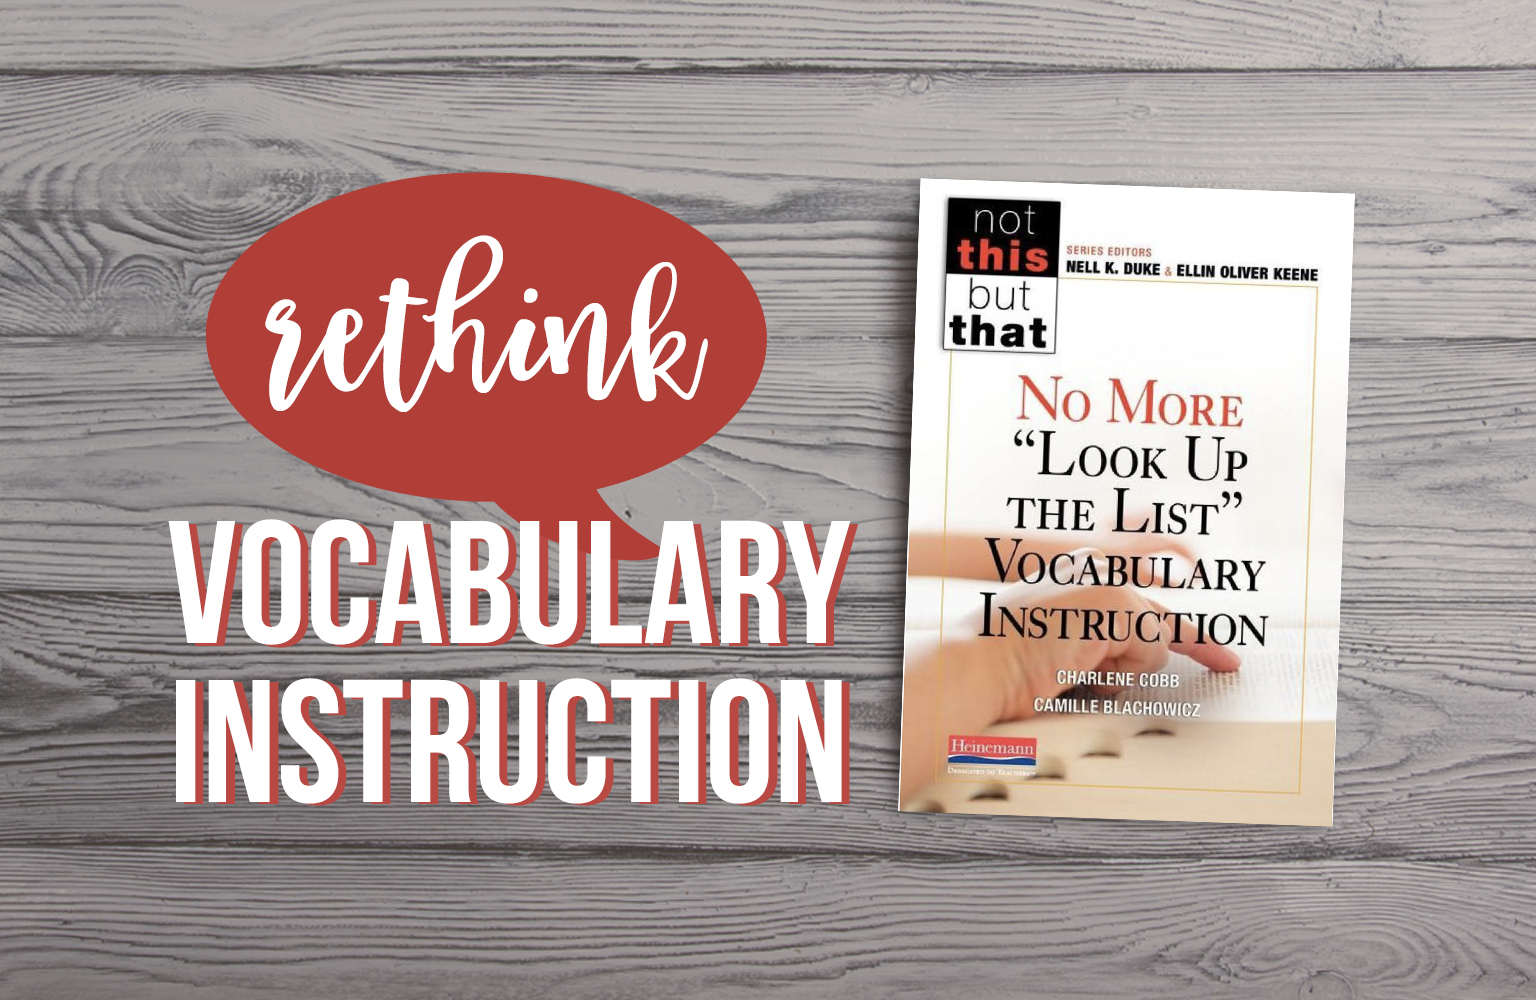 Know your vocabulary instruction is lacking but not sure how to make the change?  This book is a perfect (and fast) overview of what works in vocabulary instruction as well as what doesn't.